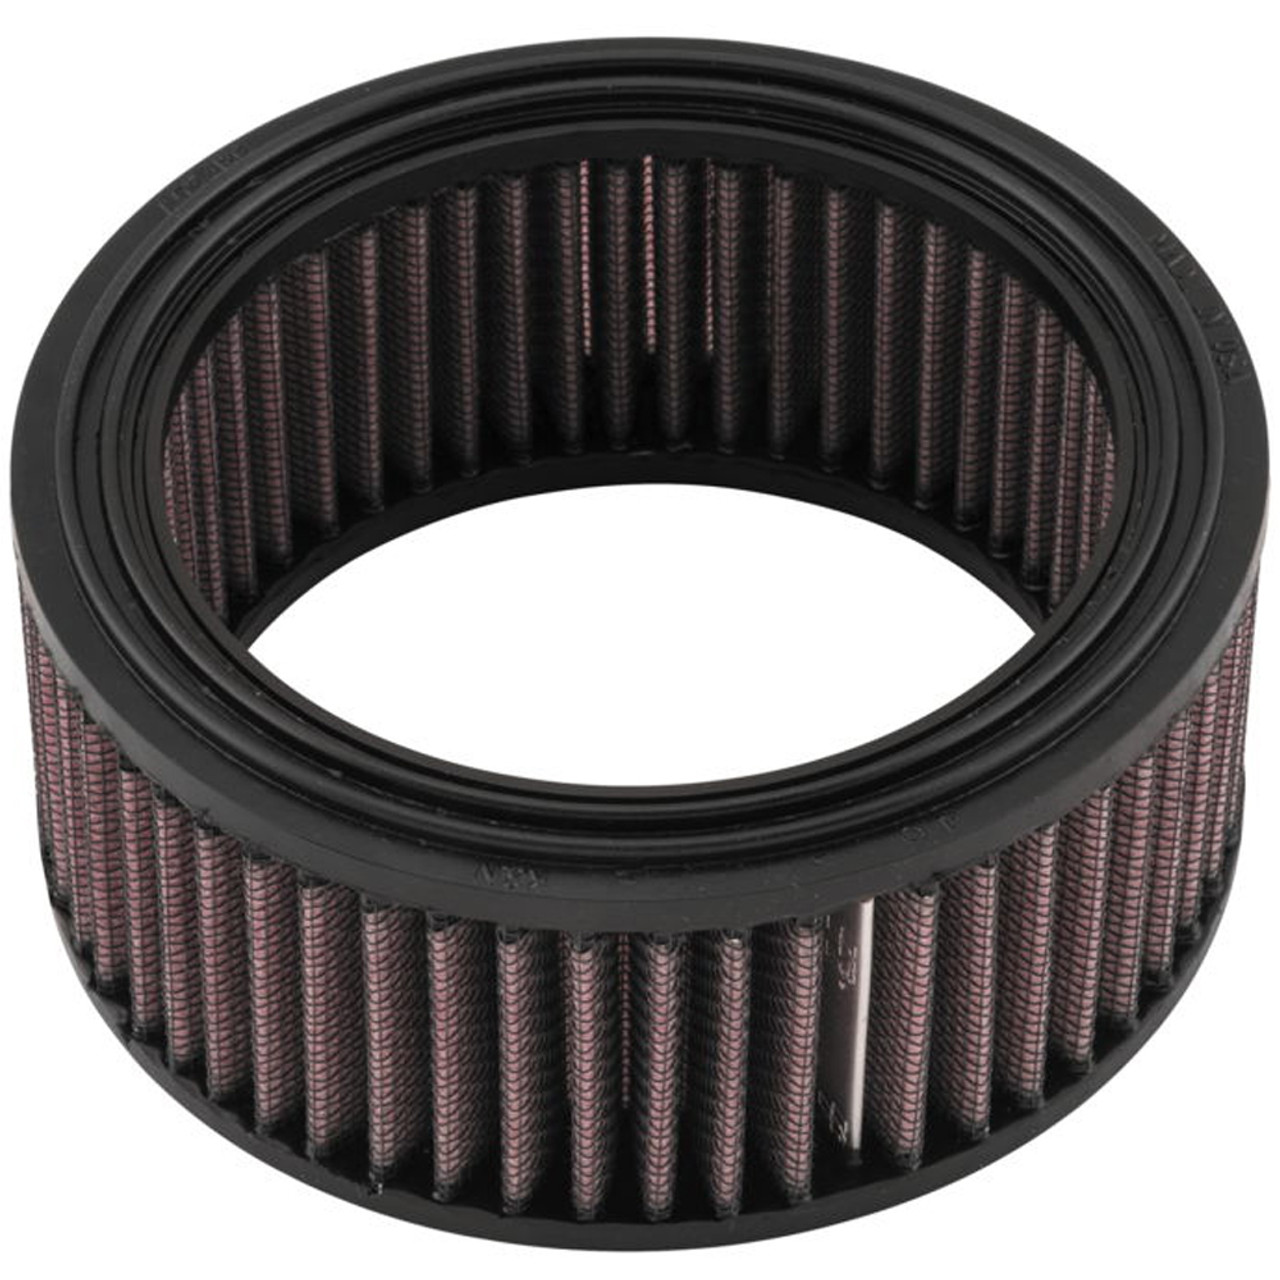 4x4 Parts - K&N Filter Charger Kit PPKN576010X - Your #1 Source for Nissan  Aftermarket Parts!